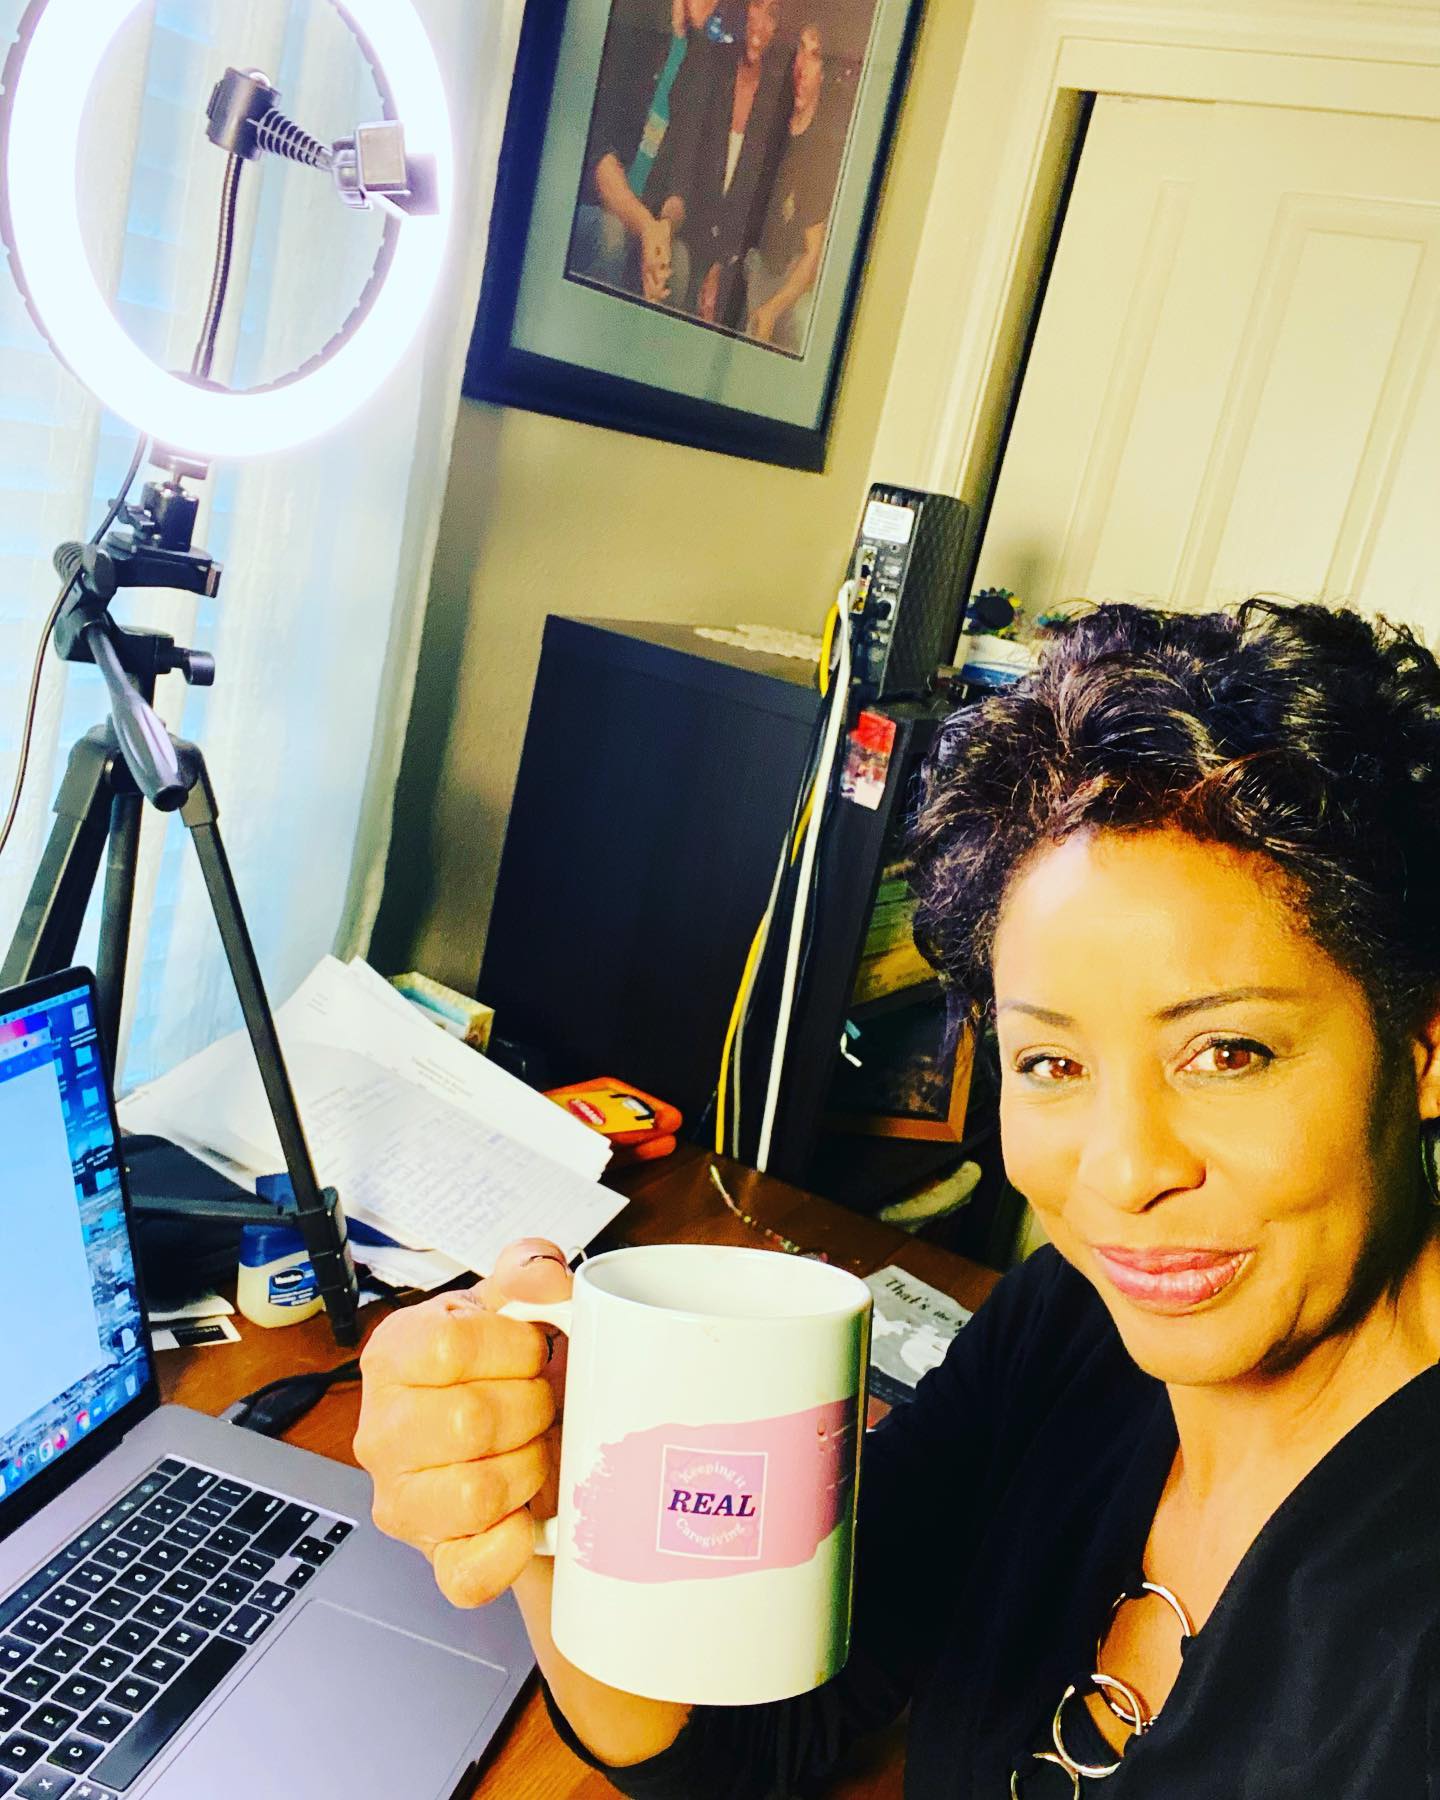 The @keepingitrealcaregiving #coffee #mug is about to roll out- super excited!
That way when we have our coffee chat & support hour… we really will all be together leaning in one another- awesome!
More details soon for those of you who would like one!

https://bit.ly/3u3bO9U